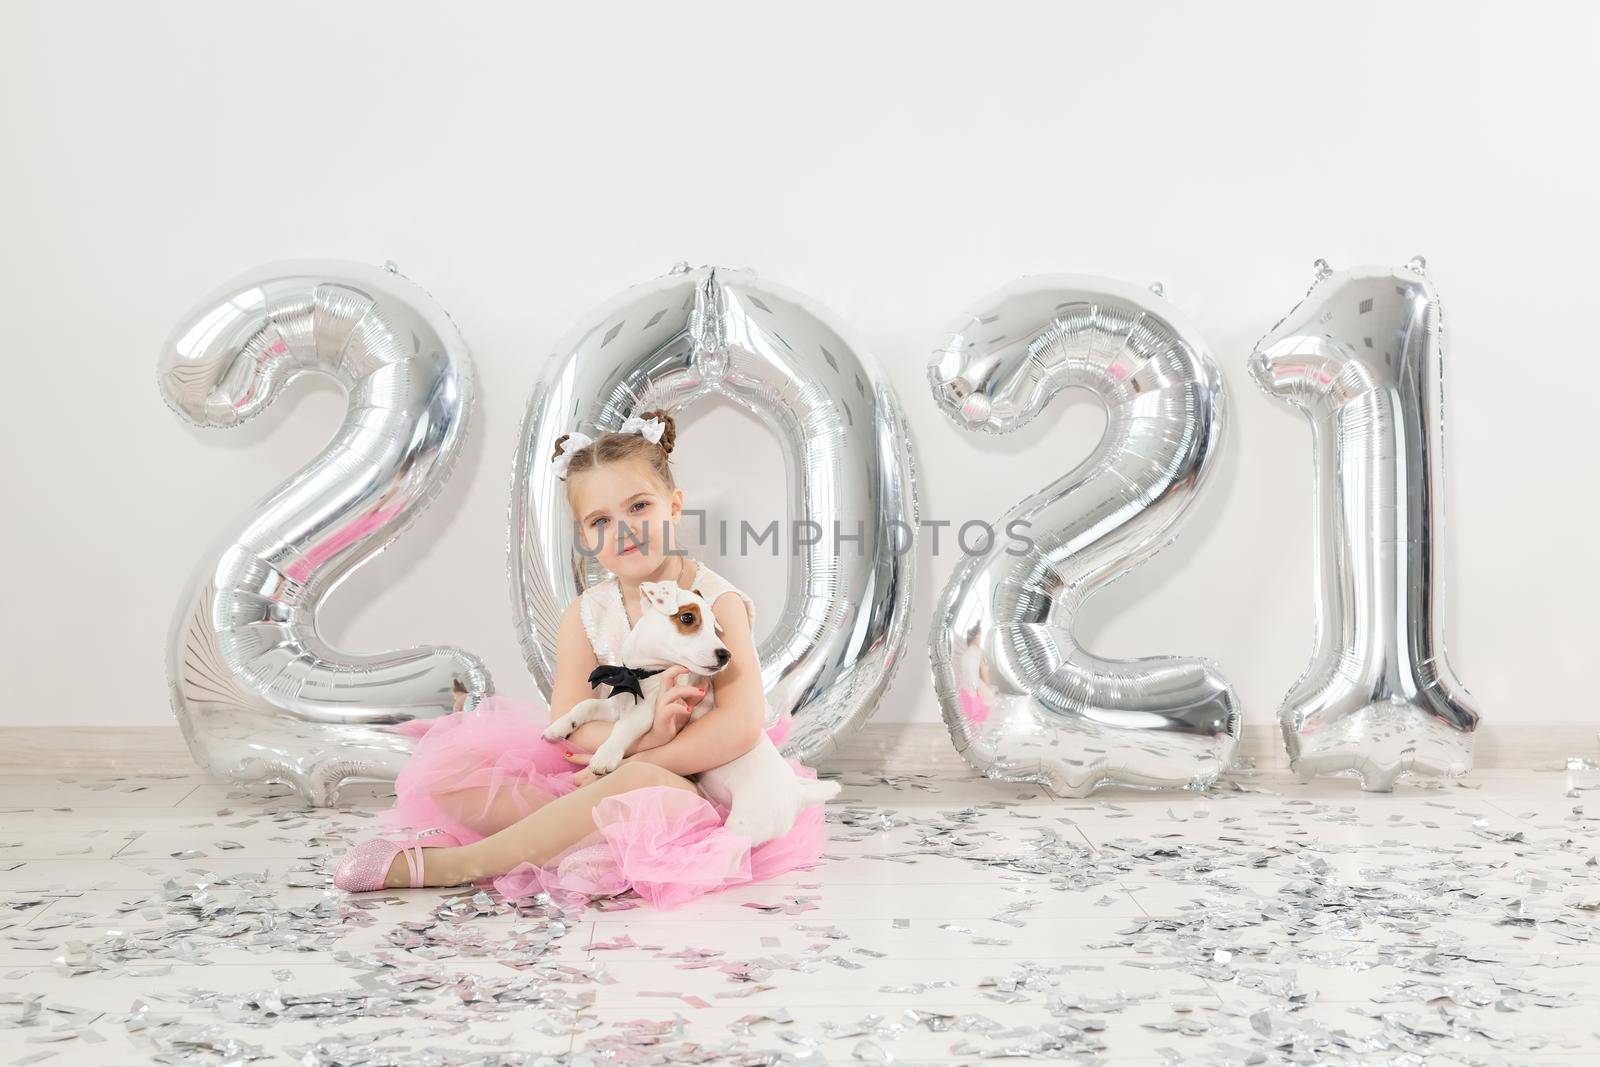 New year, holidays and celebration concept - Little child girl sitting near with numbers balloons 2021 by Satura86